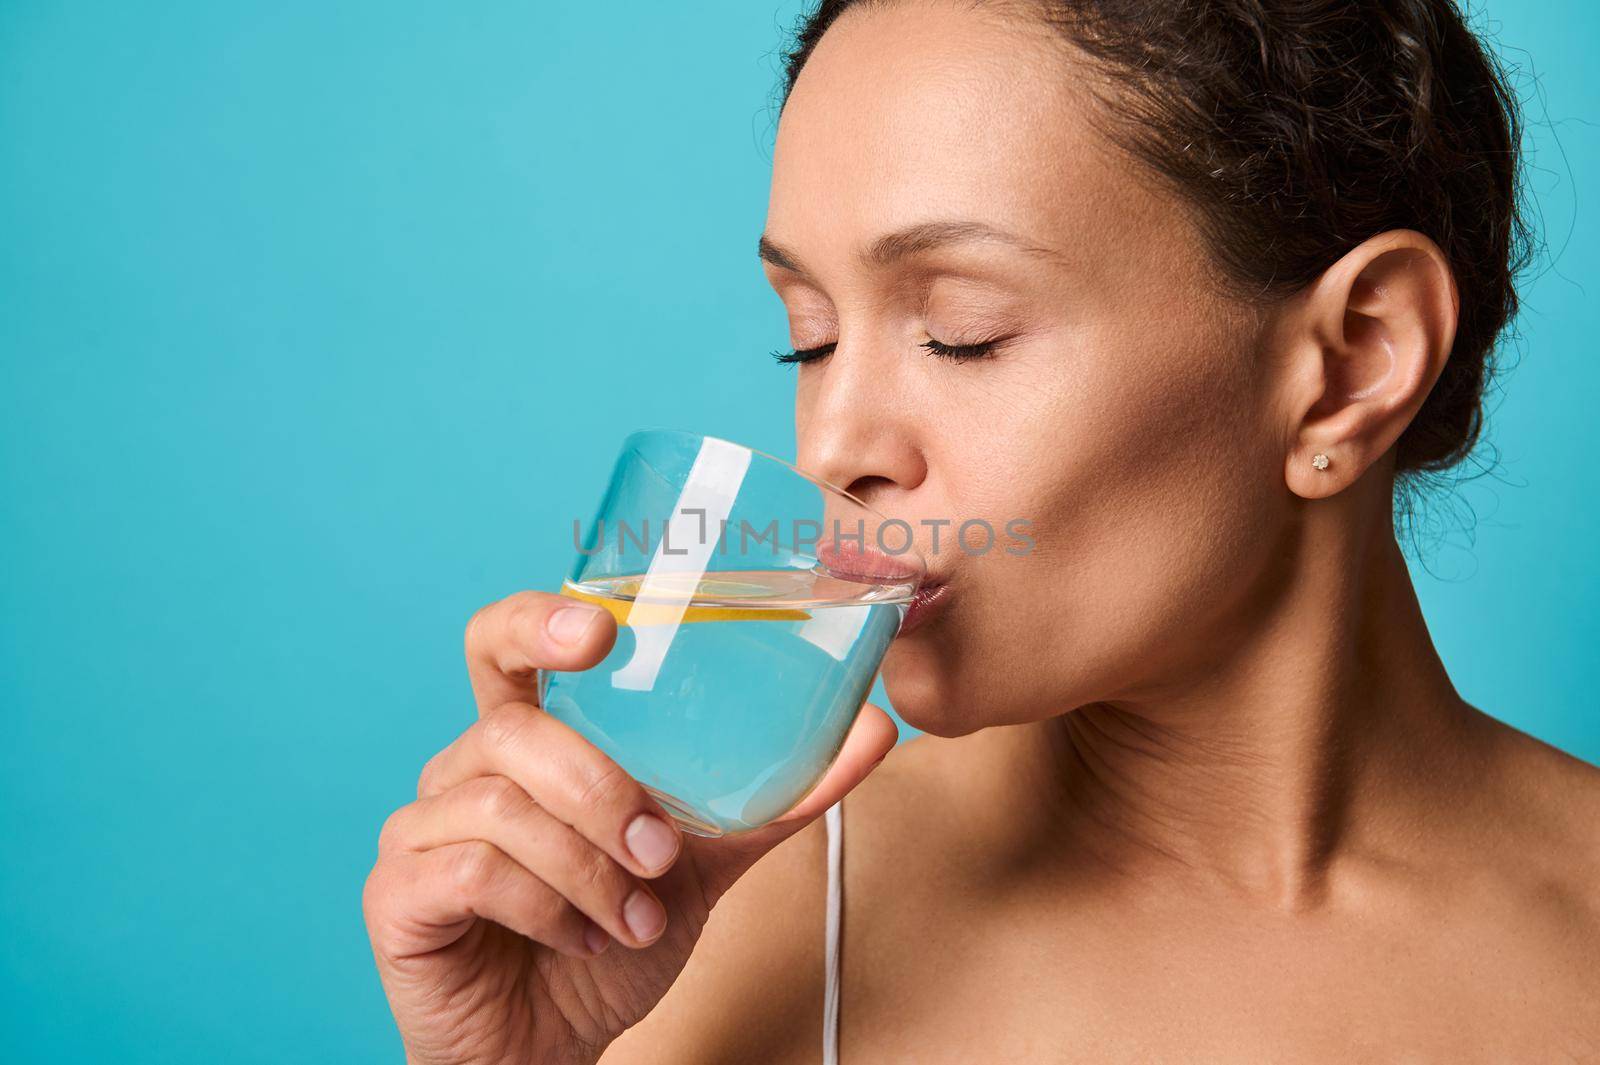 Headshot of a beautiful African woman with fresh healthy skin drinking lemon water from transparent glass, isolated over bright blue background with copy ad space. Healthy eating and lifestyle concept by artgf